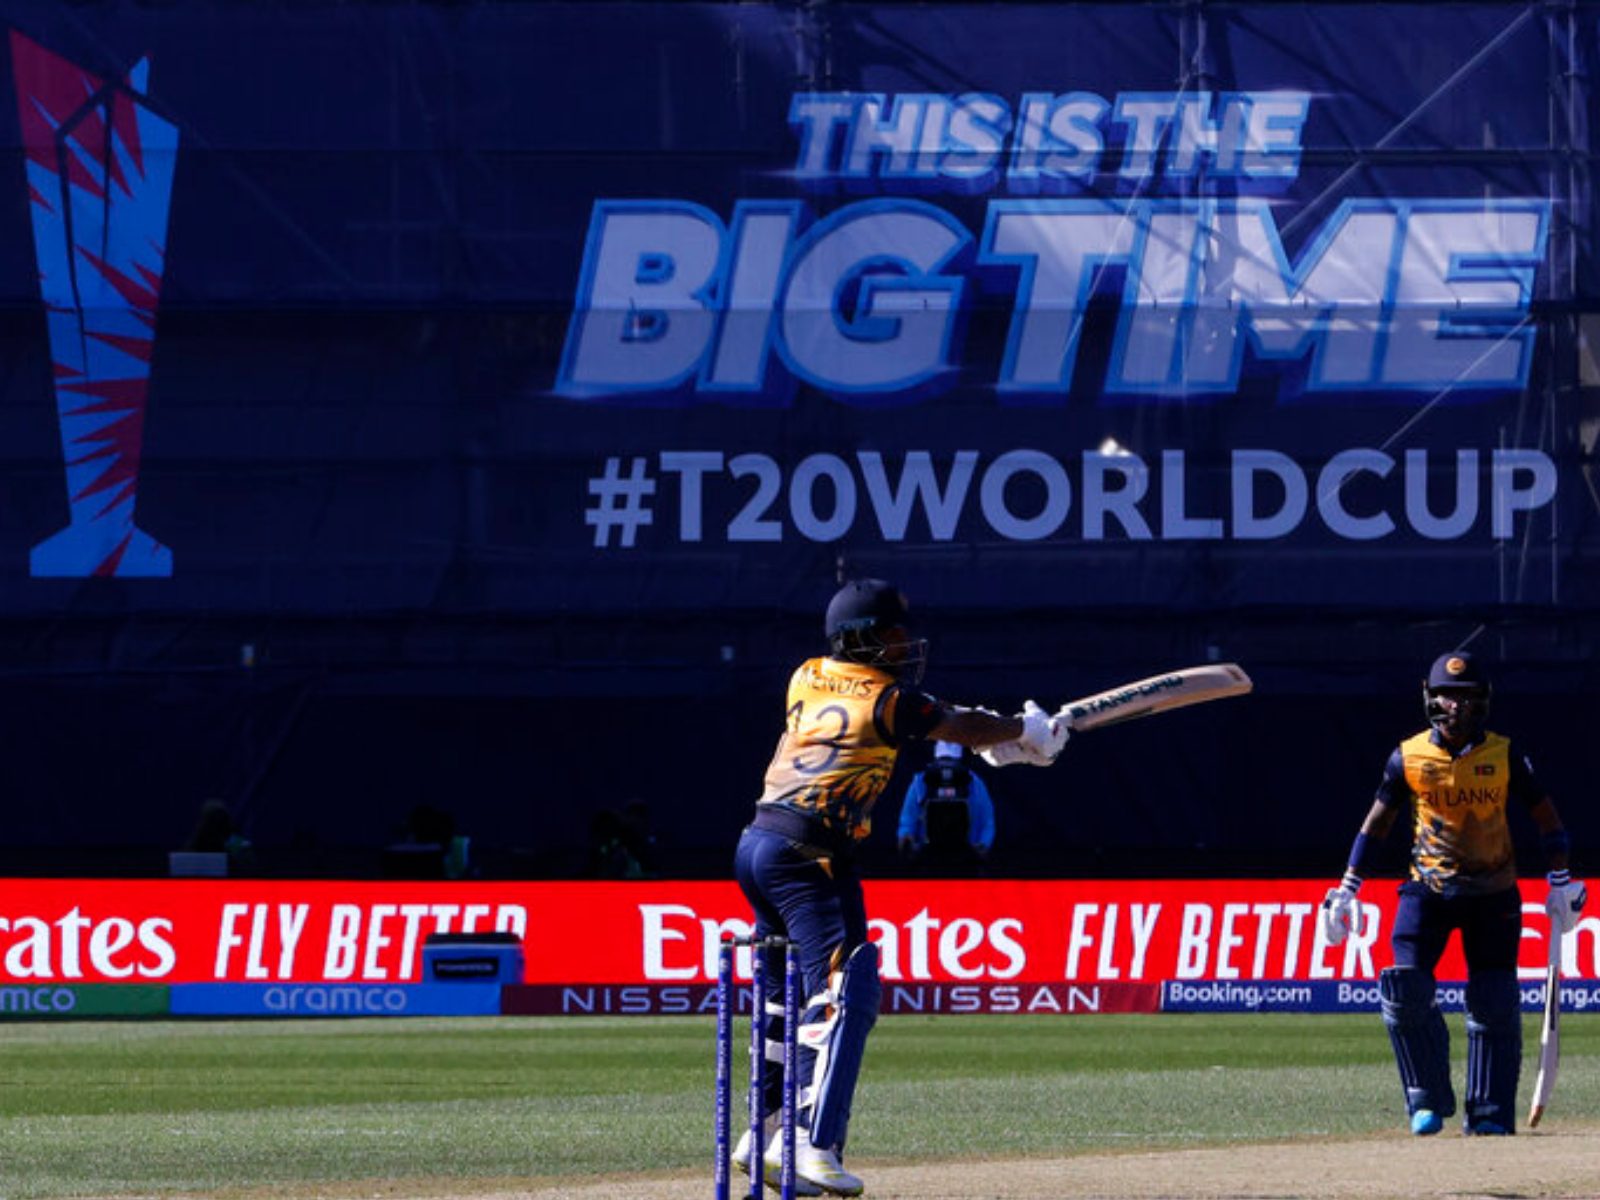 Sri Lanka enter the ICC Men's T20 World Cup with renewed confidence